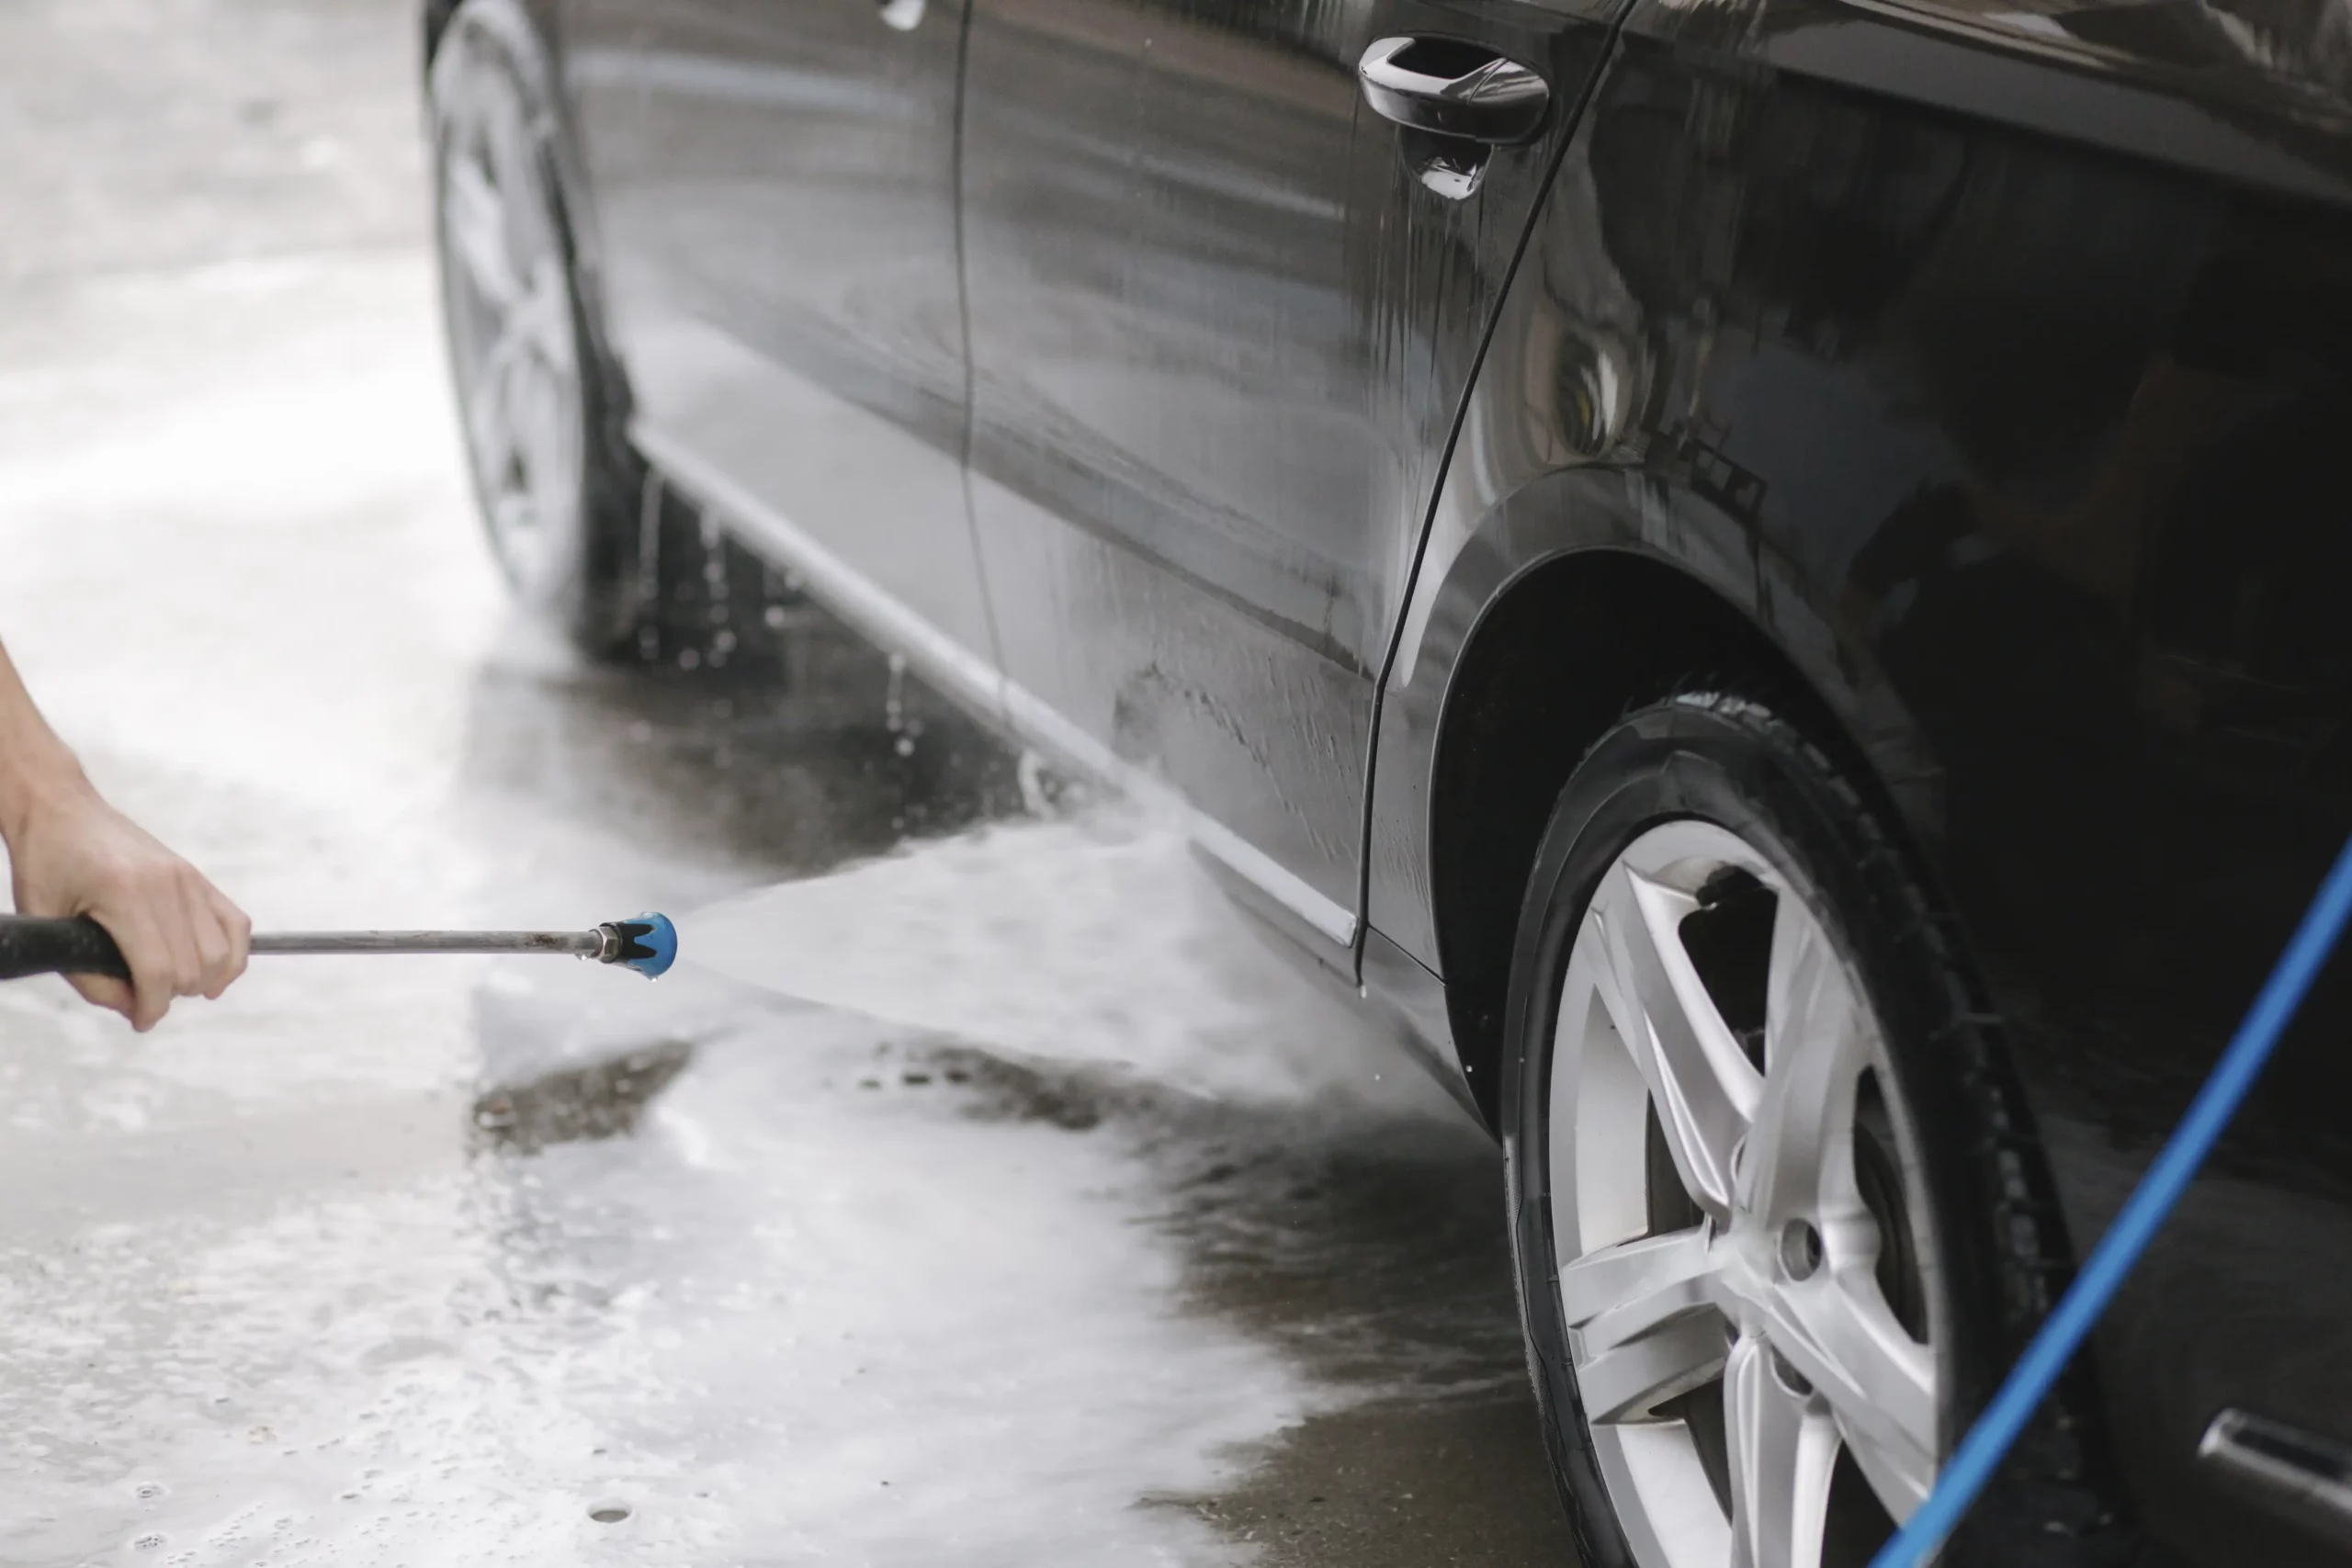 A technician wash a black car with a high pressure washer.